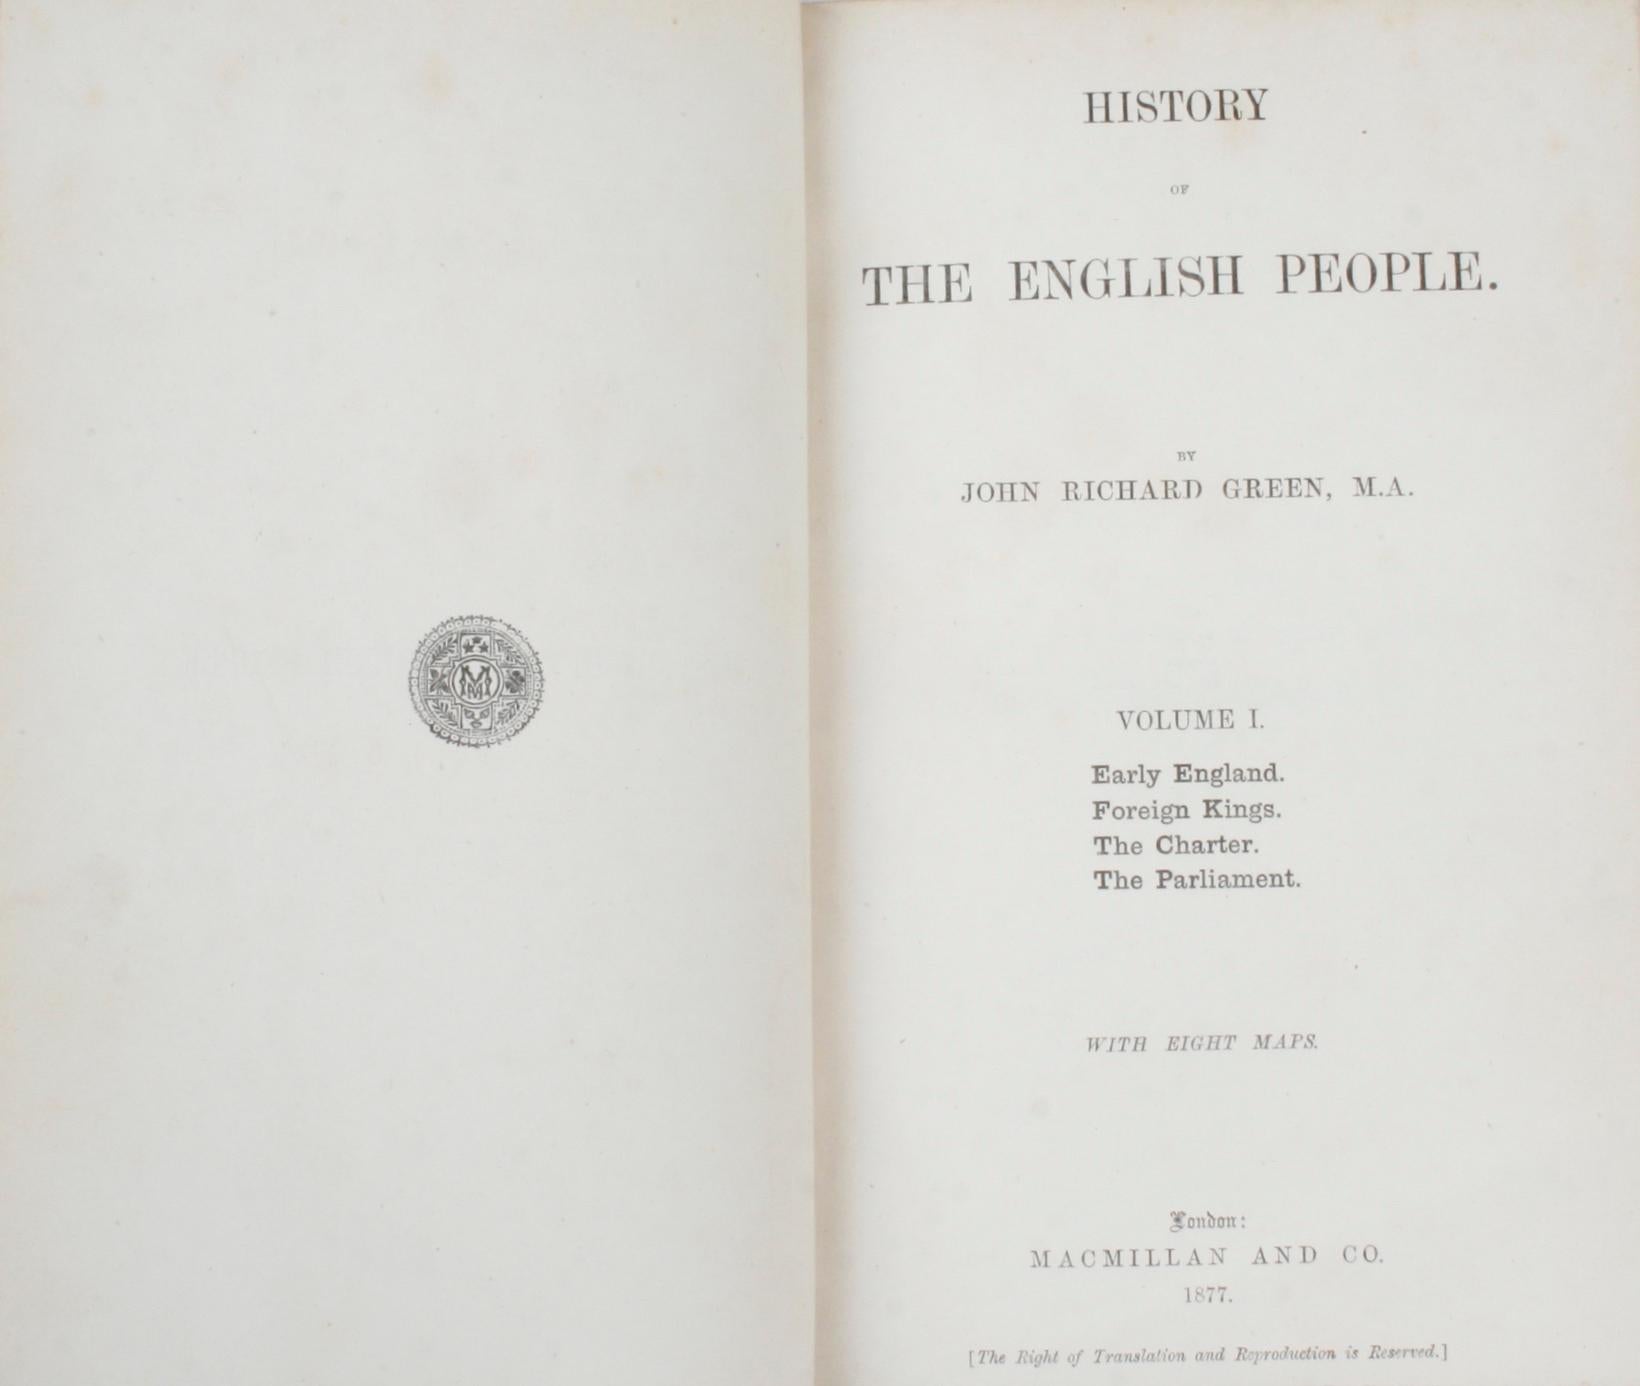 History of the English people in four volumes by John Richard Green, M.A.. London: Macmillan and Co., 1877, 1878, 1879, 1880. Calf and marbleized paper bound hardcovers. 2046 pp. Volume I sections include 